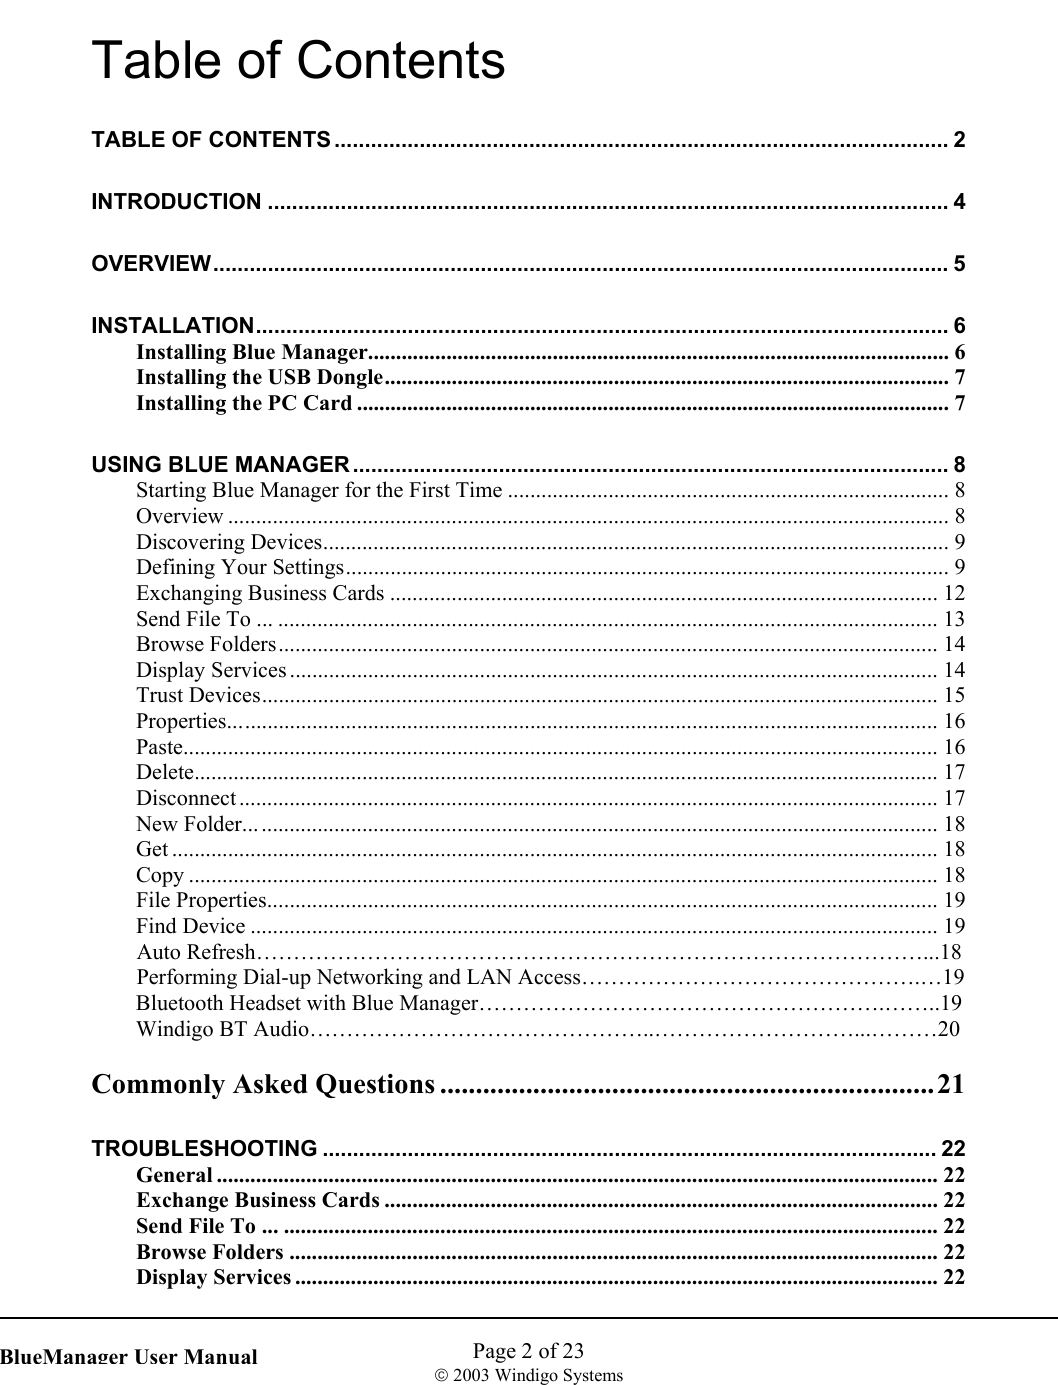    Page 2 of 23  2003 Windigo Systems   BlueManager User ManualTable of Contents TABLE OF CONTENTS ..................................................................................................... 2 INTRODUCTION ................................................................................................................ 4 OVERVIEW......................................................................................................................... 5 INSTALLATION.................................................................................................................. 6 Installing Blue Manager........................................................................................................ 6 Installing the USB Dongle..................................................................................................... 7 Installing the PC Card ..........................................................................................................7 USING BLUE MANAGER .................................................................................................. 8 Starting Blue Manager for the First Time ............................................................................... 8 Overview ................................................................................................................................. 8 Discovering Devices................................................................................................................ 9 Defining Your Settings............................................................................................................ 9 Exchanging Business Cards .................................................................................................. 12 Send File To ... ...................................................................................................................... 13 Browse Folders...................................................................................................................... 14 Display Services .................................................................................................................... 14 Trust Devices......................................................................................................................... 15 Properties............................................................................................................................... 16 Paste....................................................................................................................................... 16 Delete..................................................................................................................................... 17 Disconnect ............................................................................................................................. 17 New Folder............................................................................................................................ 18 Get ......................................................................................................................................... 18 Copy ...................................................................................................................................... 18 File Properties........................................................................................................................ 19 Find Device ........................................................................................................................... 19  Auto Refresh………………………………………………………………………………...18   Performing Dial-up Networking and LAN Access……………………………………….…19 Bluetooth Headset with Blue Manager……………………………………………….……..19 Windigo BT Audio………………………………………..………………………...………20  Commonly Asked Questions .....................................................................21 TROUBLESHOOTING ..................................................................................................... 22 General ................................................................................................................................. 22 Exchange Business Cards ................................................................................................... 22 Send File To ... ..................................................................................................................... 22 Browse Folders .................................................................................................................... 22 Display Services ................................................................................................................... 22 